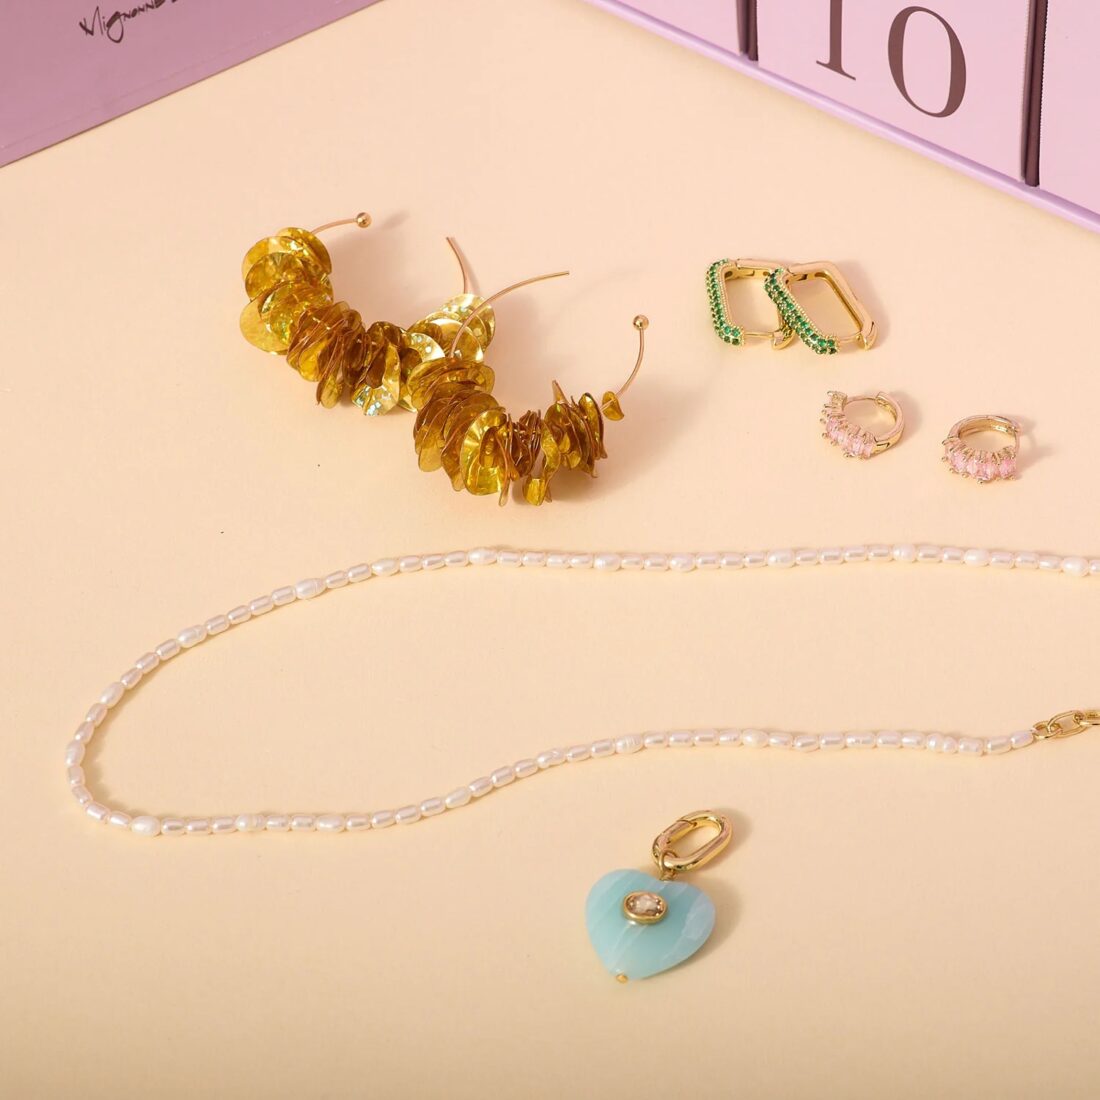 A pearl necklace, gold hoops, gold hoops with green jewels, gold hoops with pink jewels, and a blue heart-shaped pendant on a light peach background beneath a purple advent calendar box.